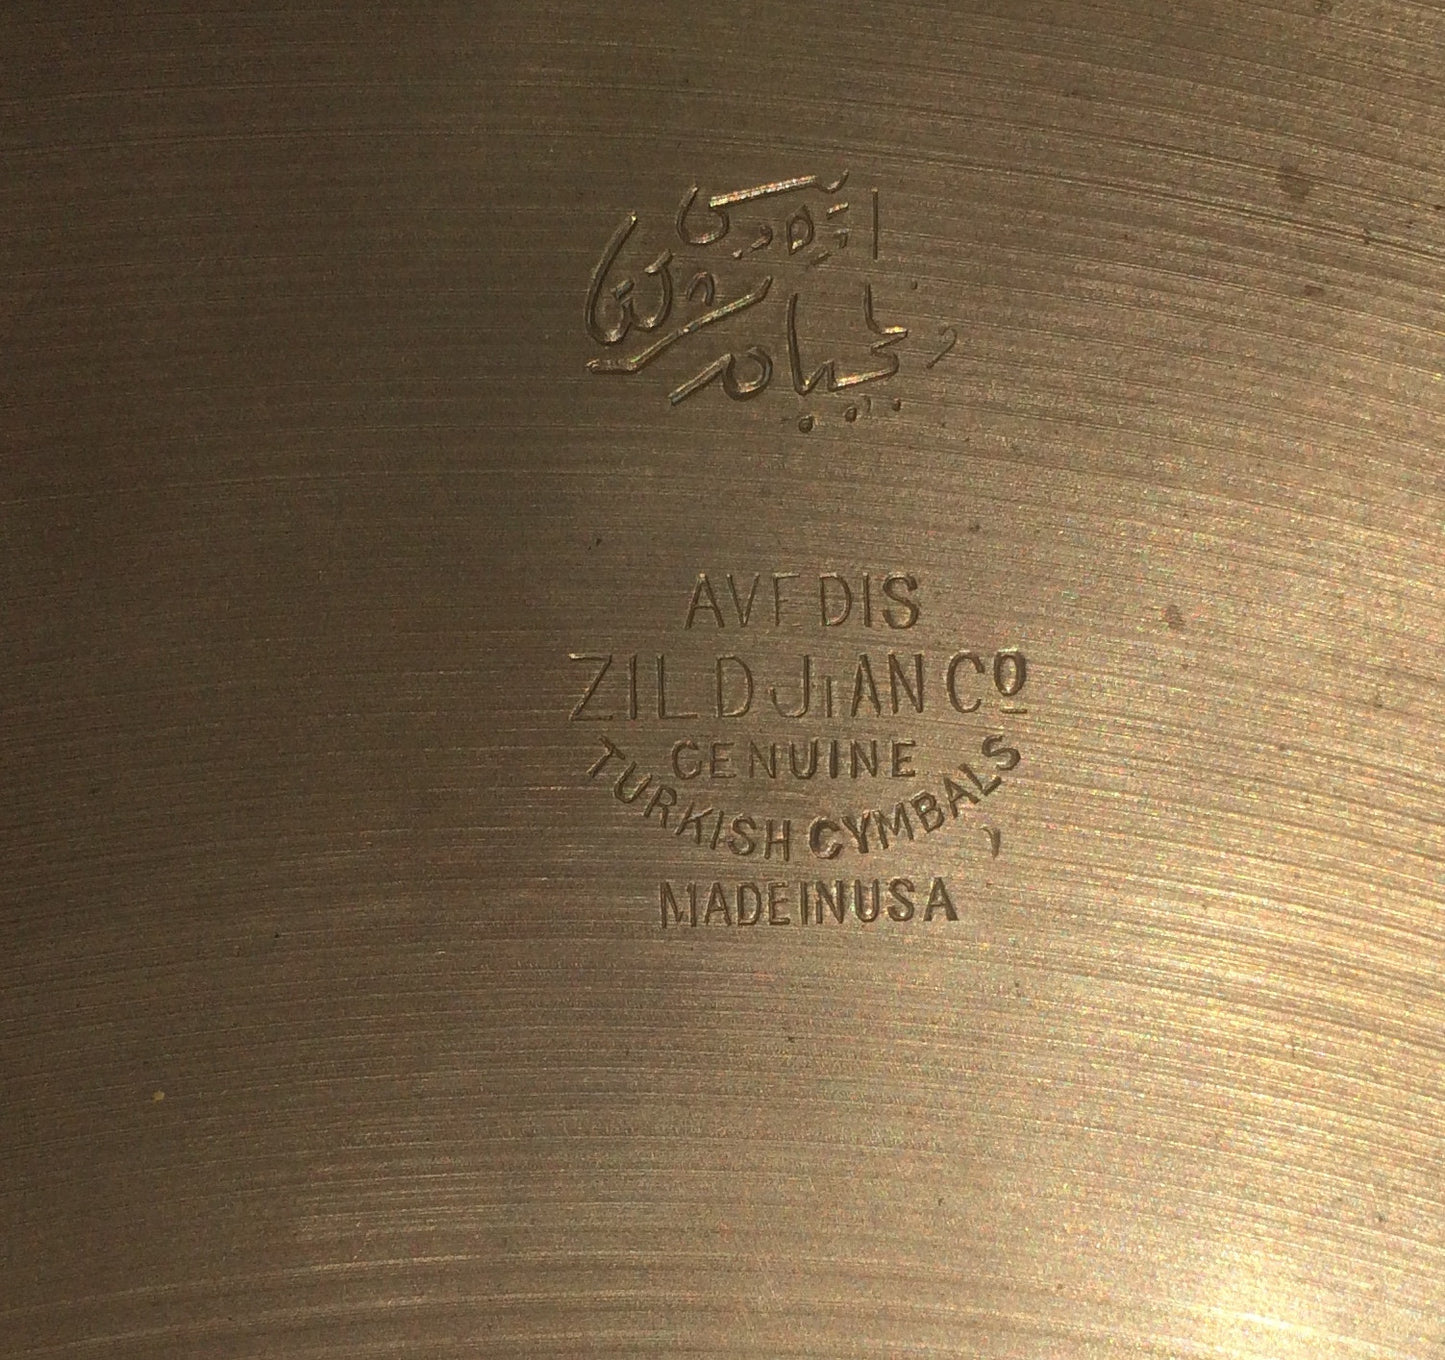 18" Vintage Early-Mid 1940's Zildjian A Crash-Ride Cymbal 1468g - Inventory # 161